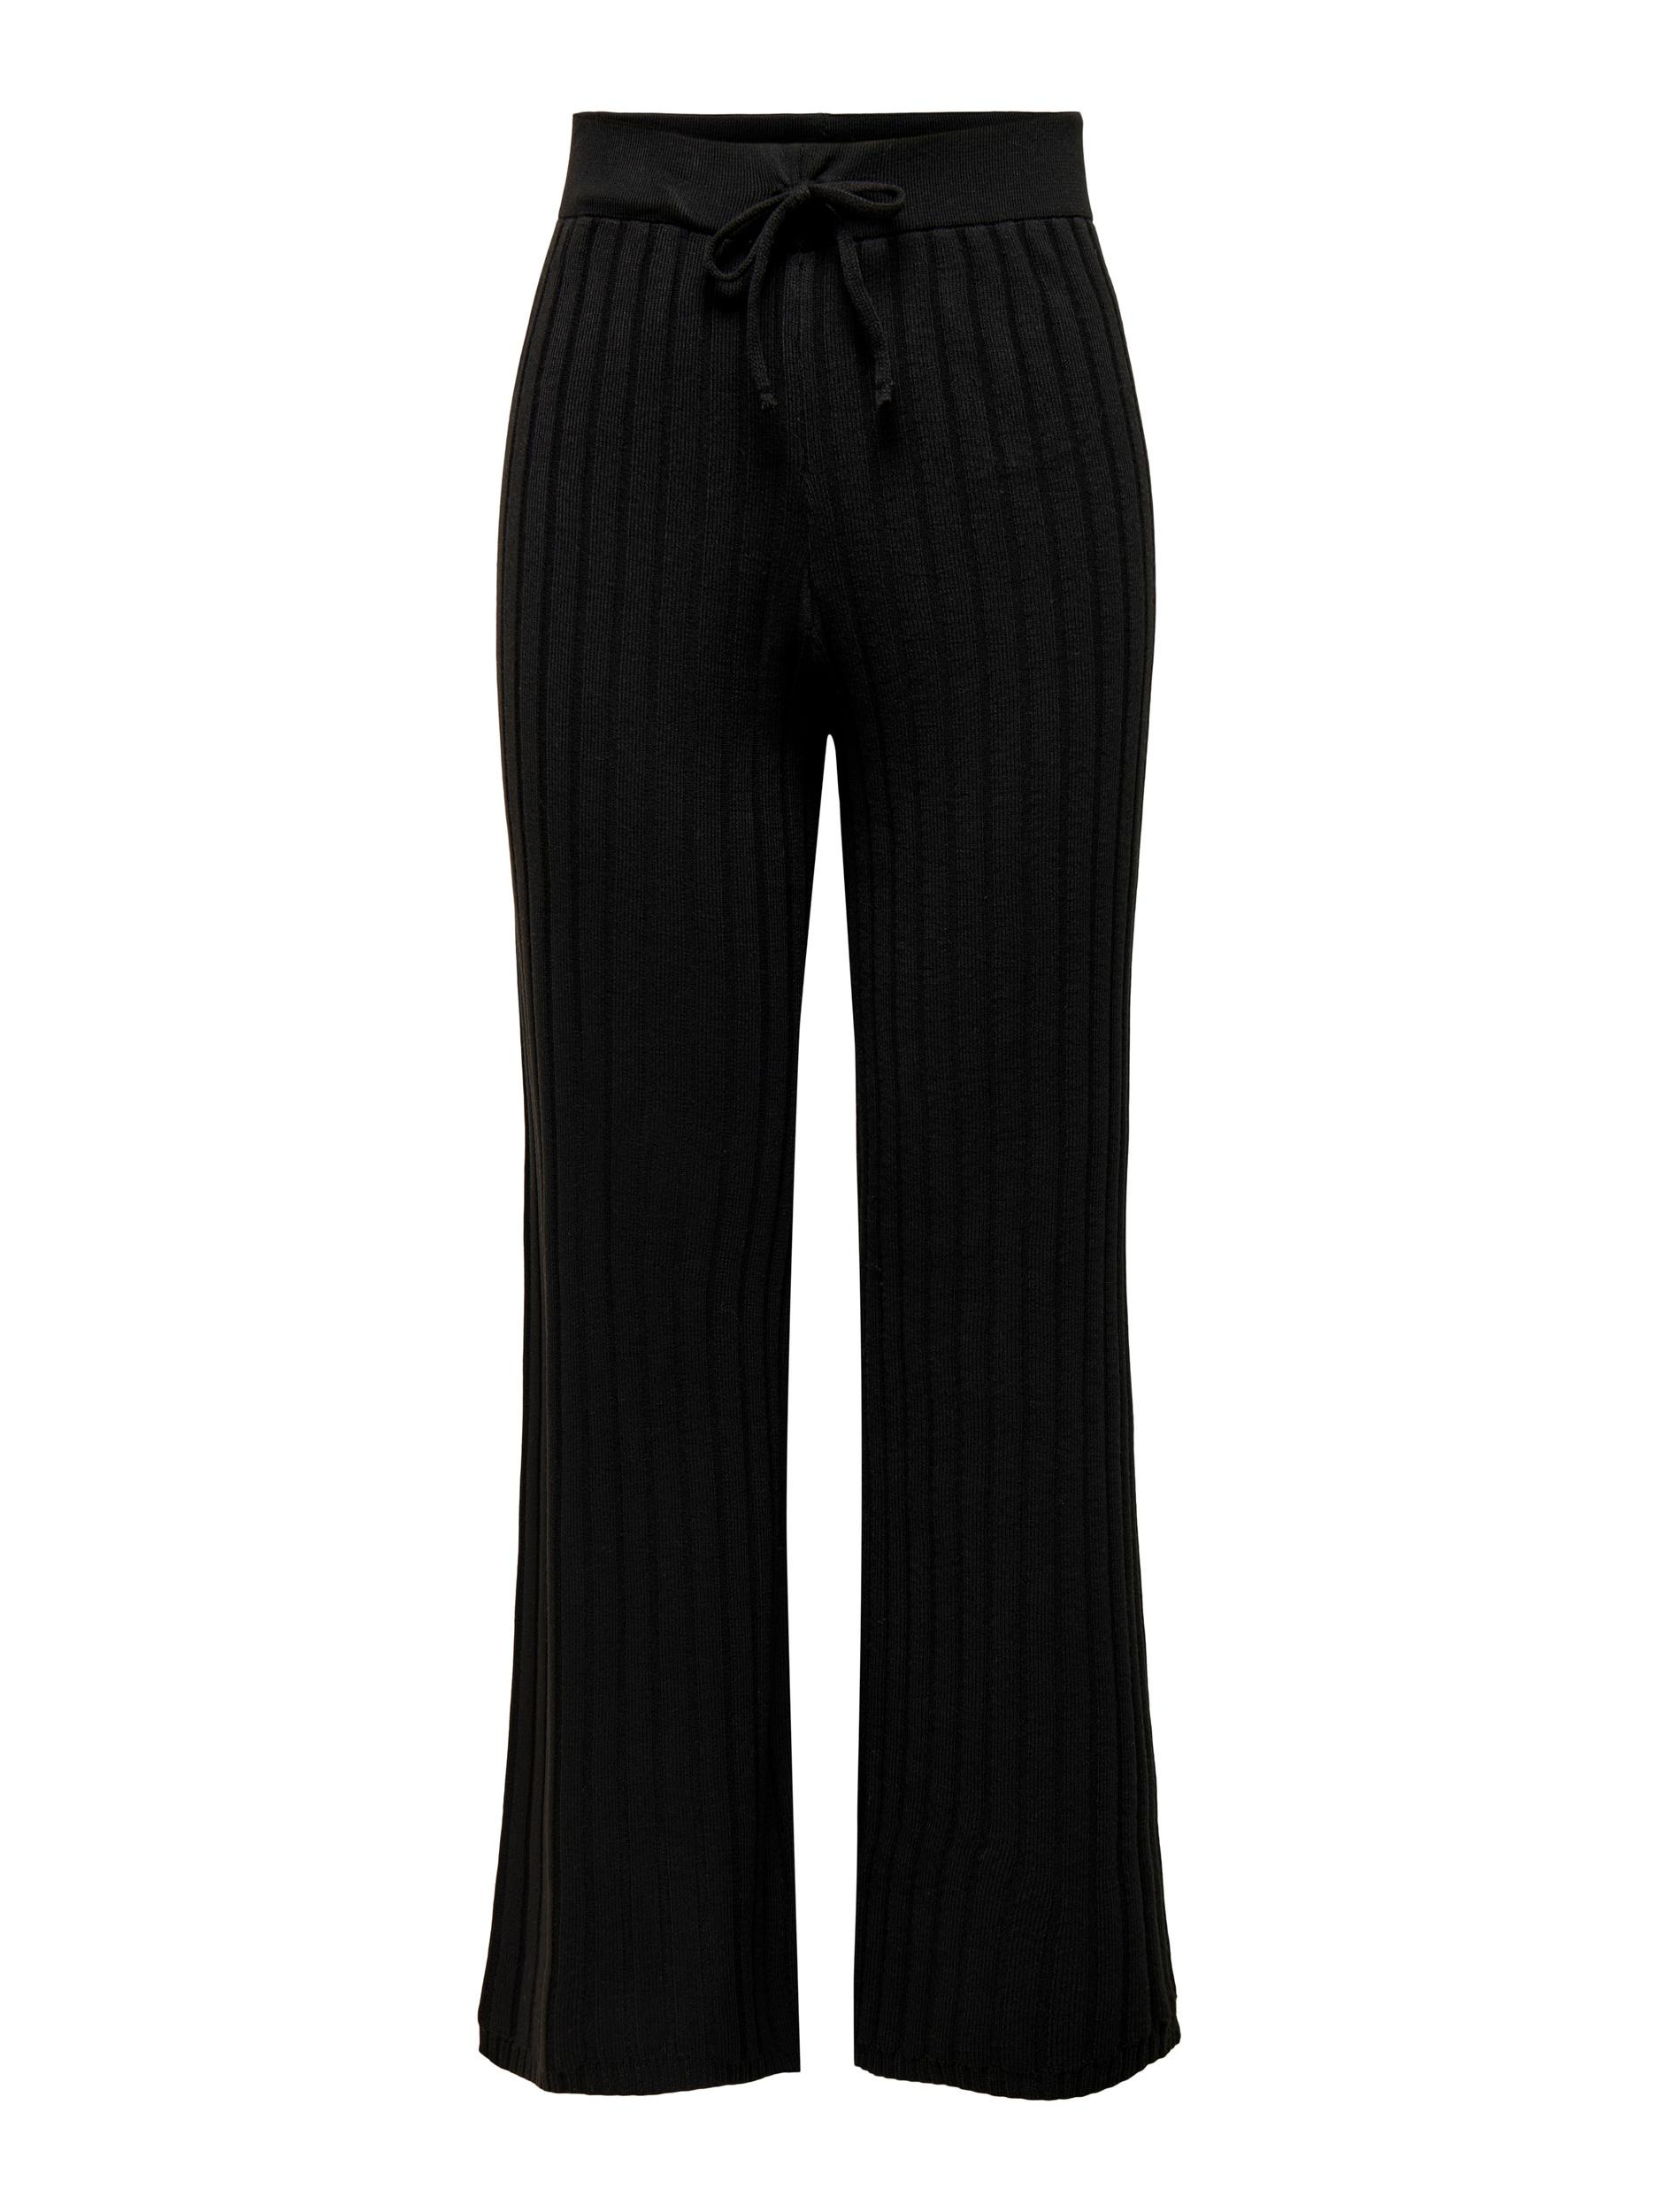 high-waisted trousers, Black, large image number 0